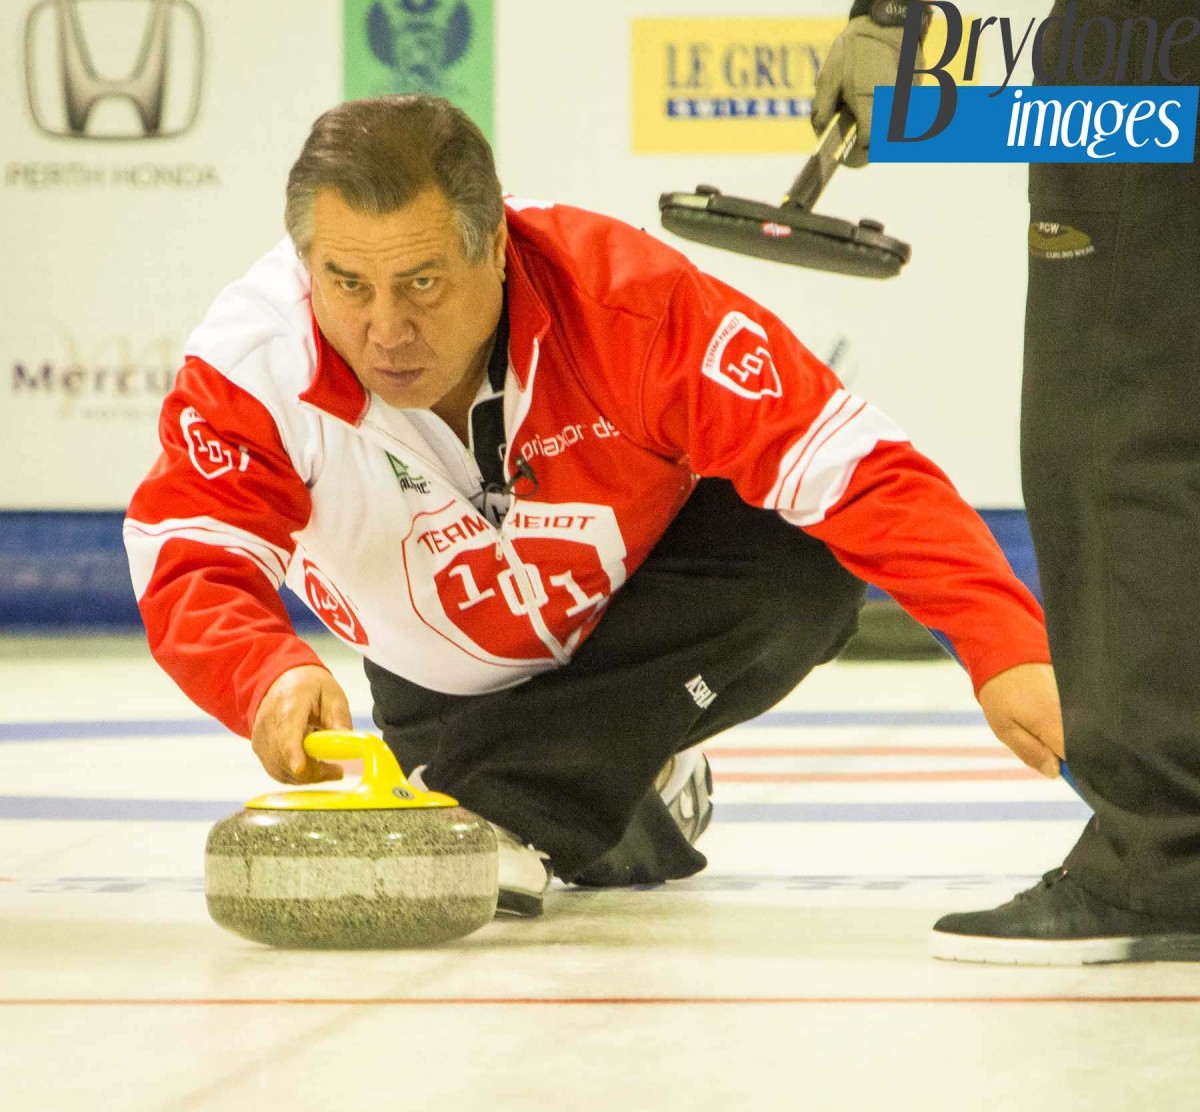 Brad Heidt of Team Heidt from Canada curling in the Perth Masters 2016